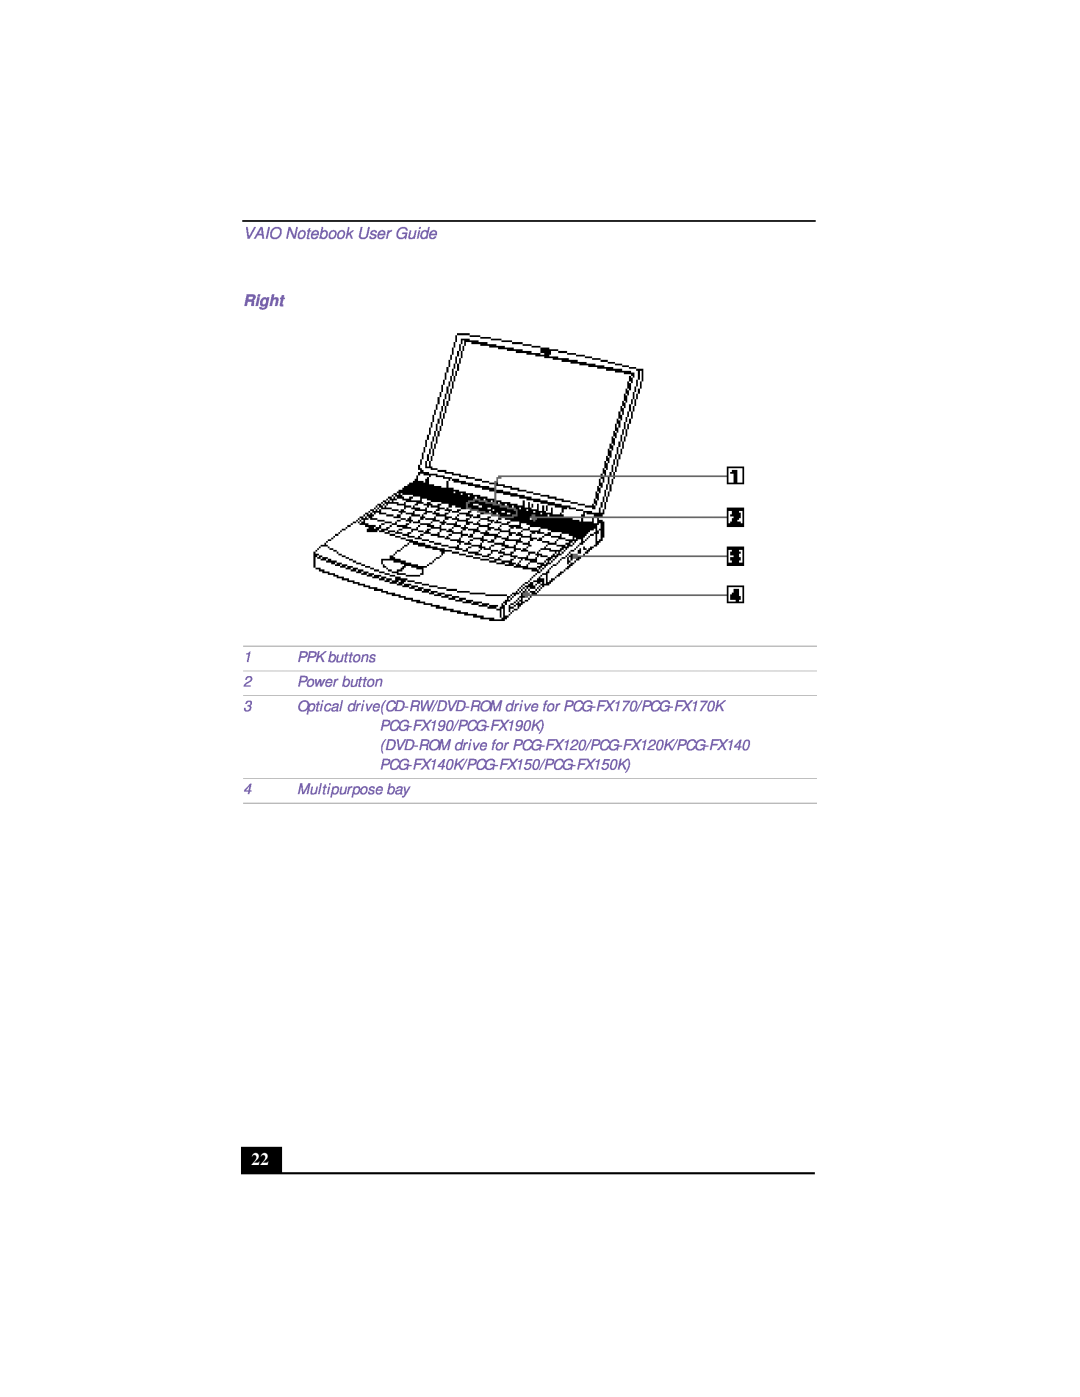 Sony PCG-FX190, PCG-FX150K, PCG-FX140 VAIO Notebook User Guide, Right 1 PPK buttons 2 Power button, Multipurpose bay 